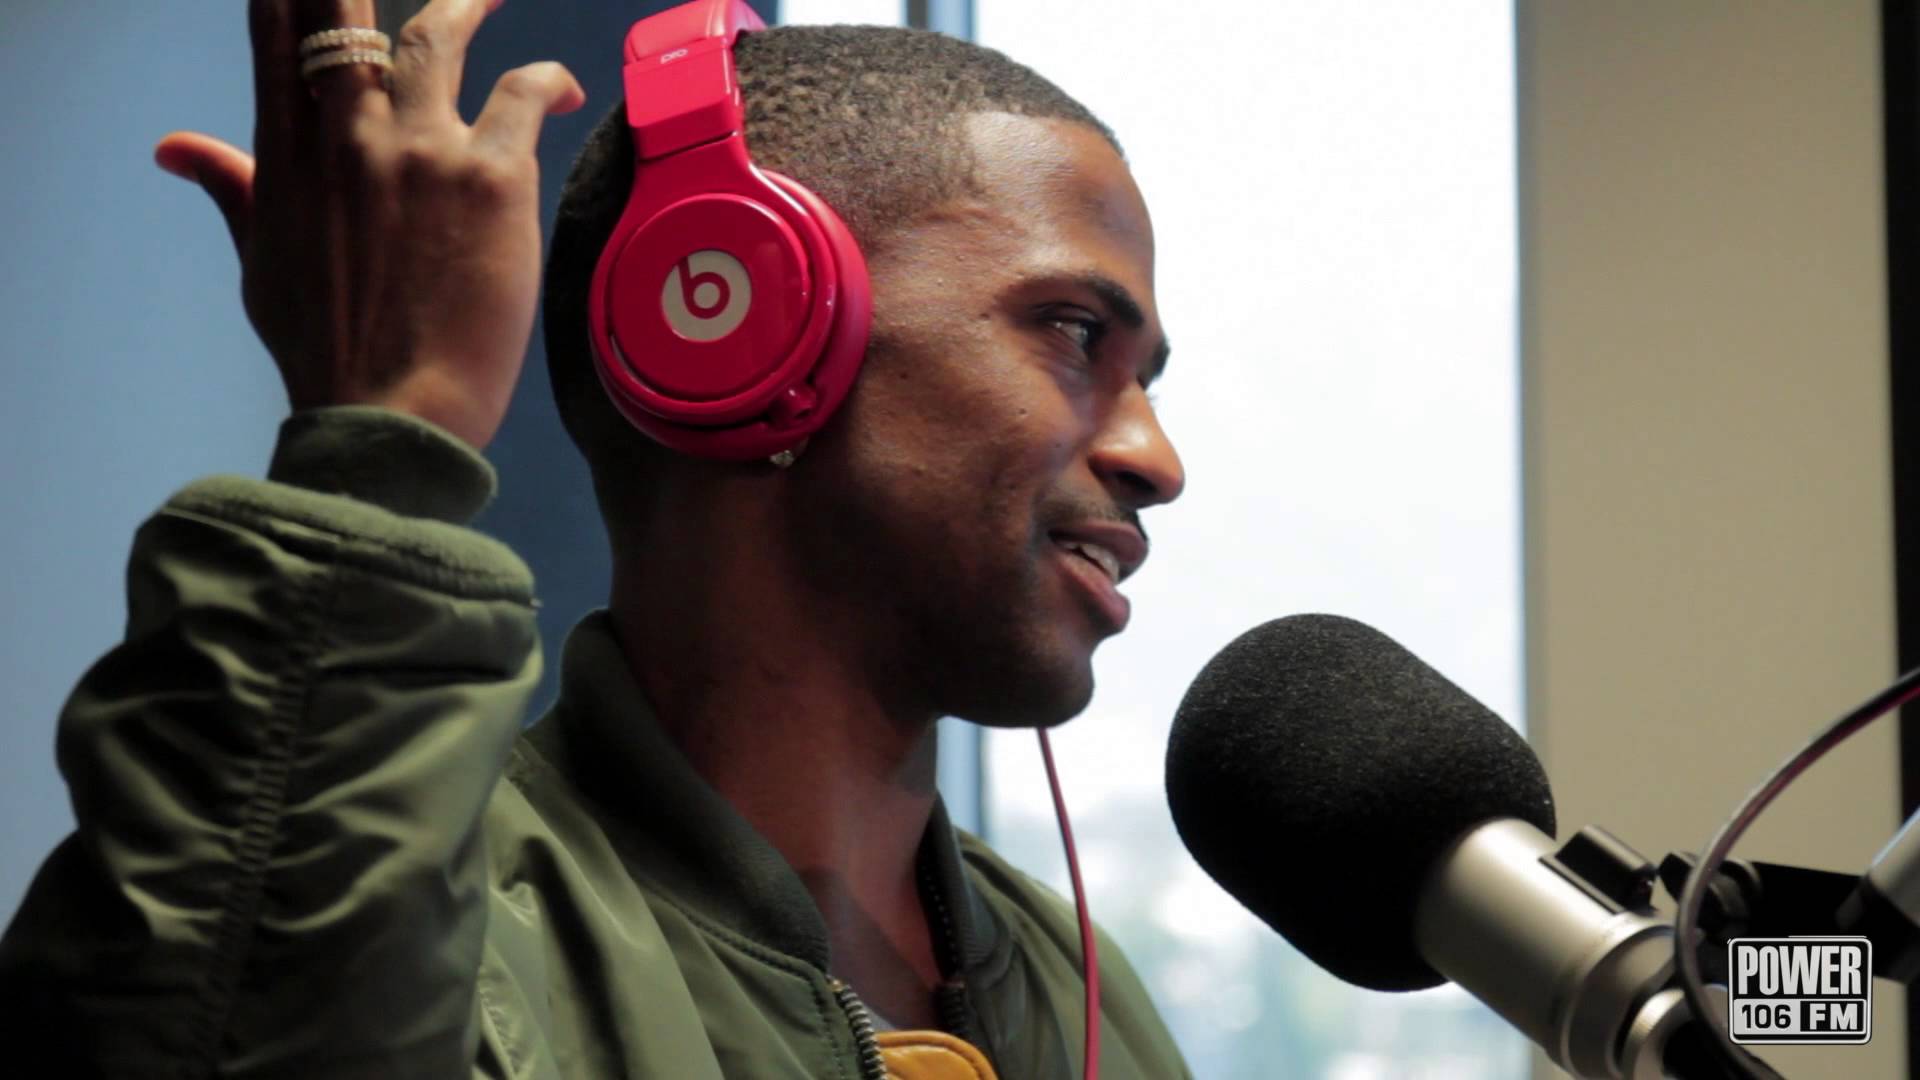 Big Sean Wants to Inspire and Change; Up Close with Justin Credible #LIFTOFF (Video)